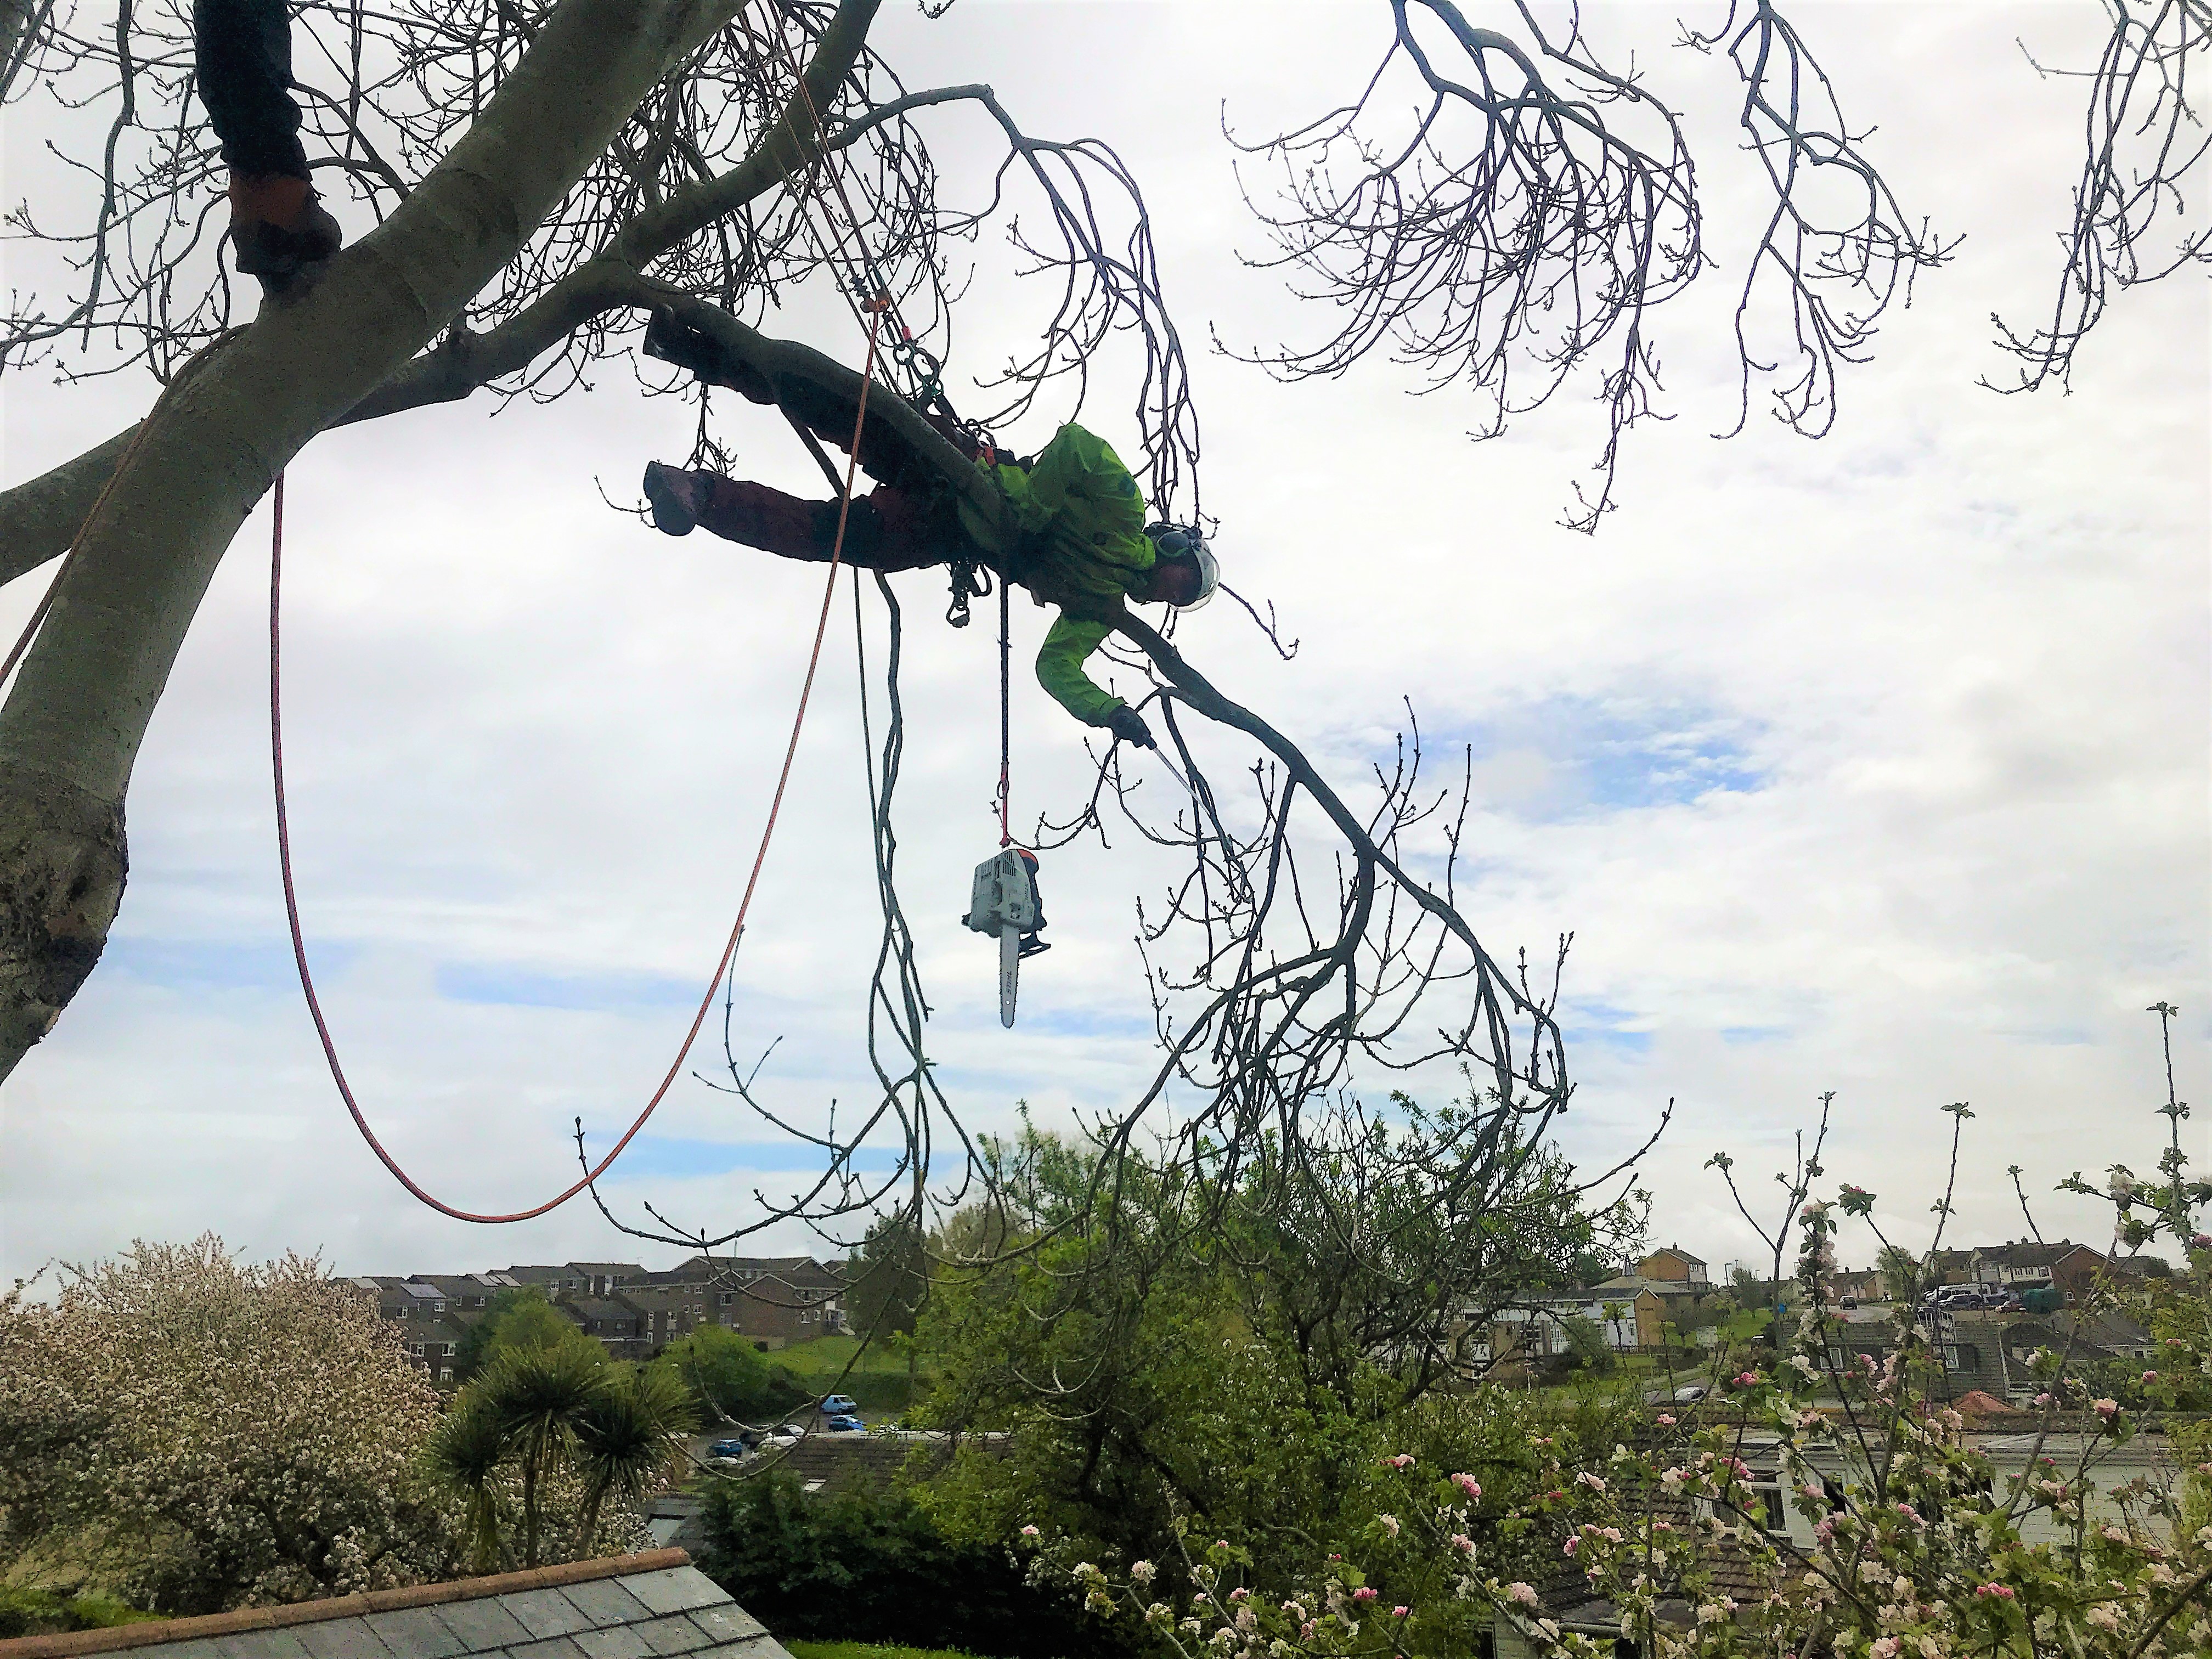 Weymouth Tree Surgeon | Tree Pruning Service in Weymouth, Dorchester, Portland, Dorset